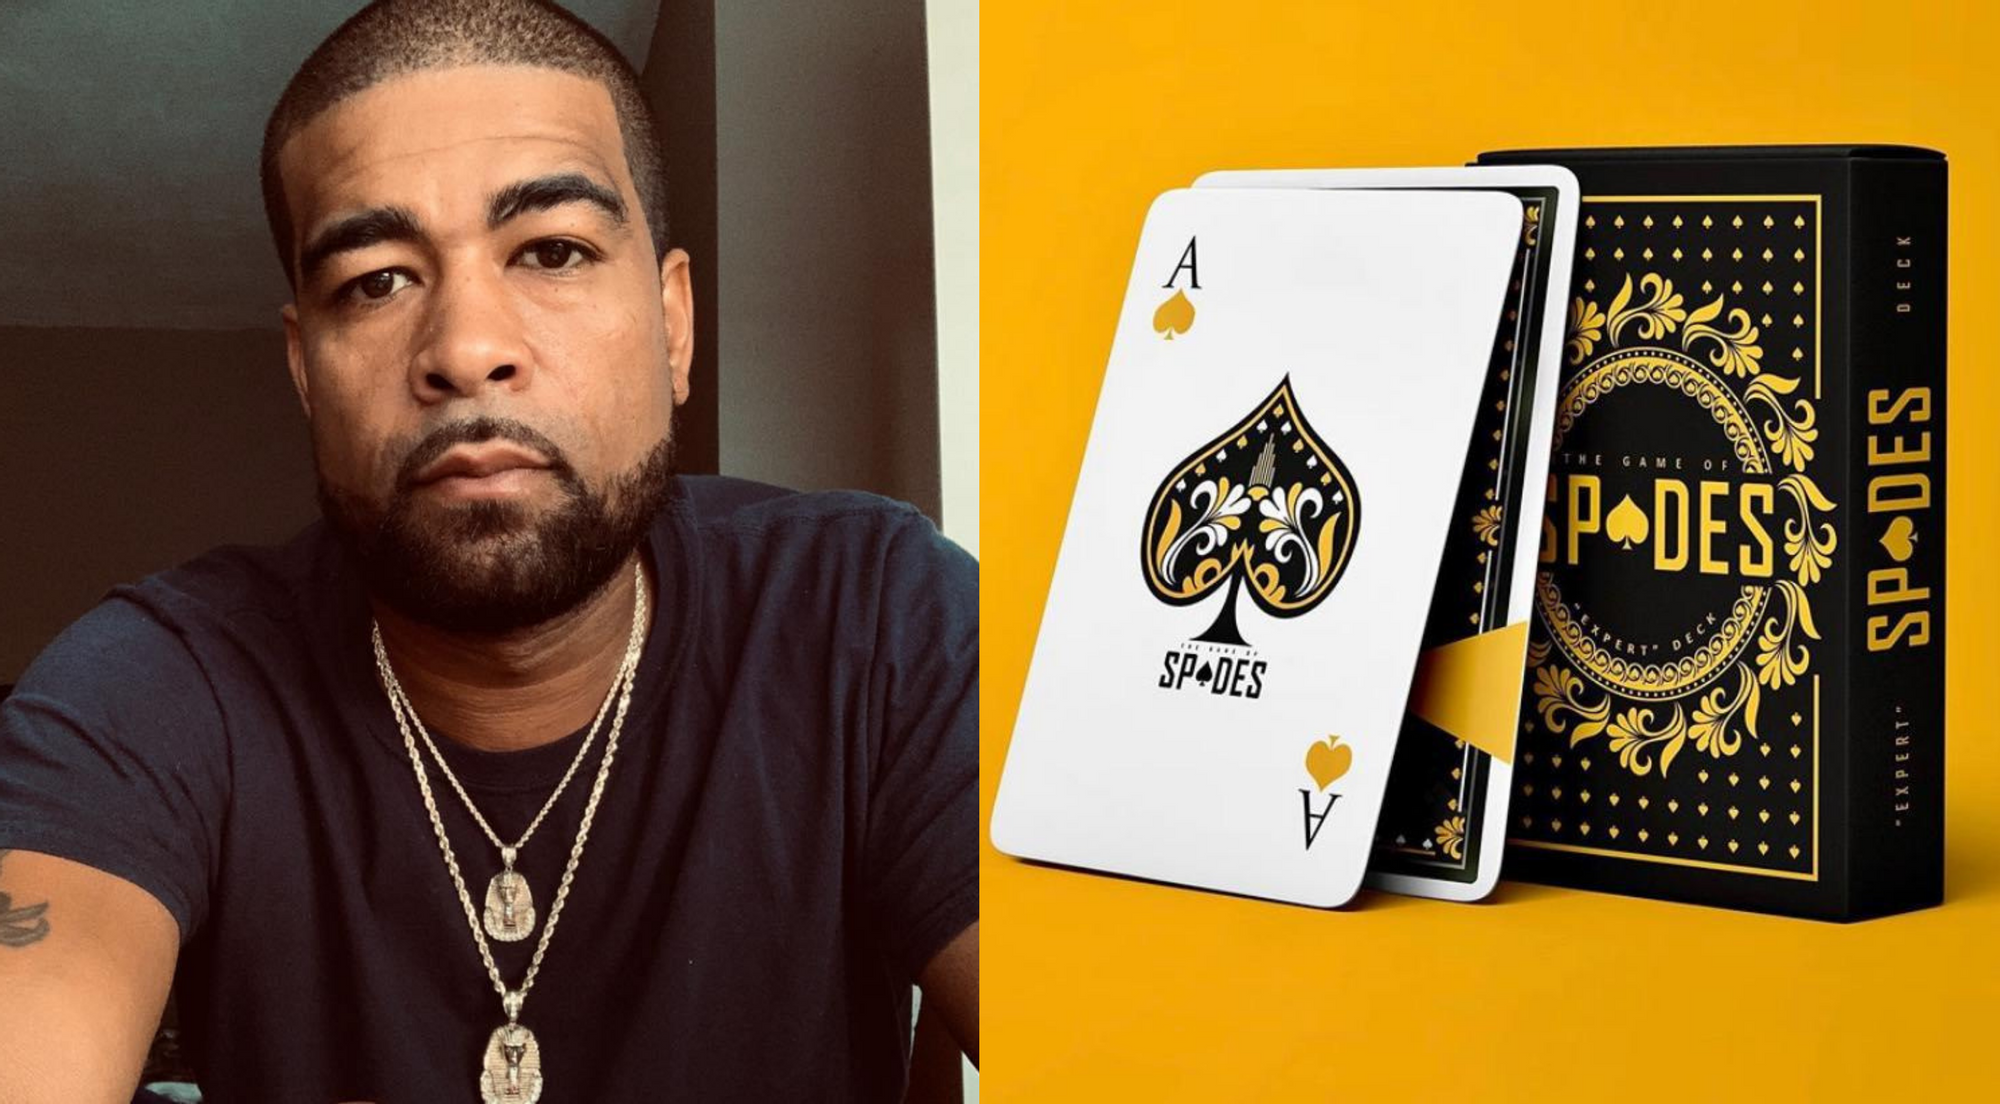 This Black Entrepreneur is Taking Cards to the Next Level with The Game of Spades